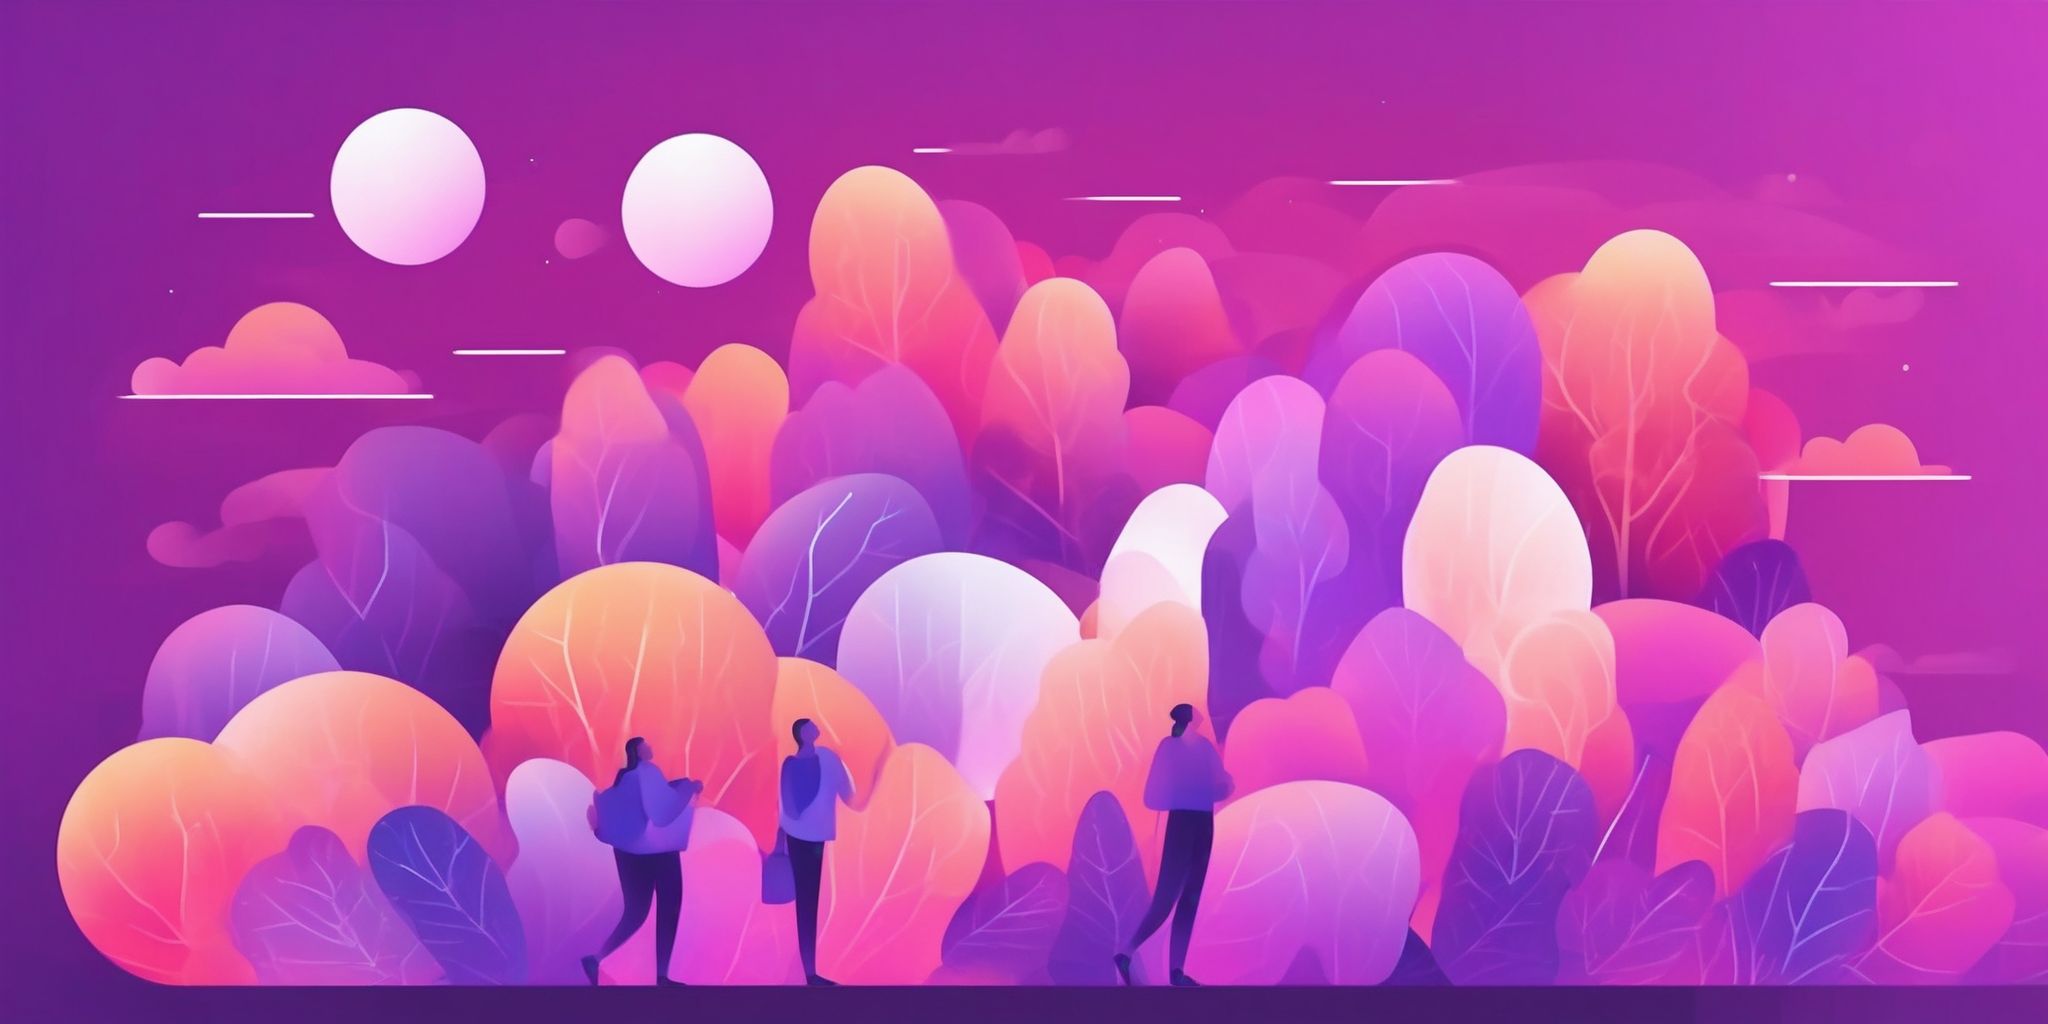 Benefits in flat illustration style, colorful purple gradient colors